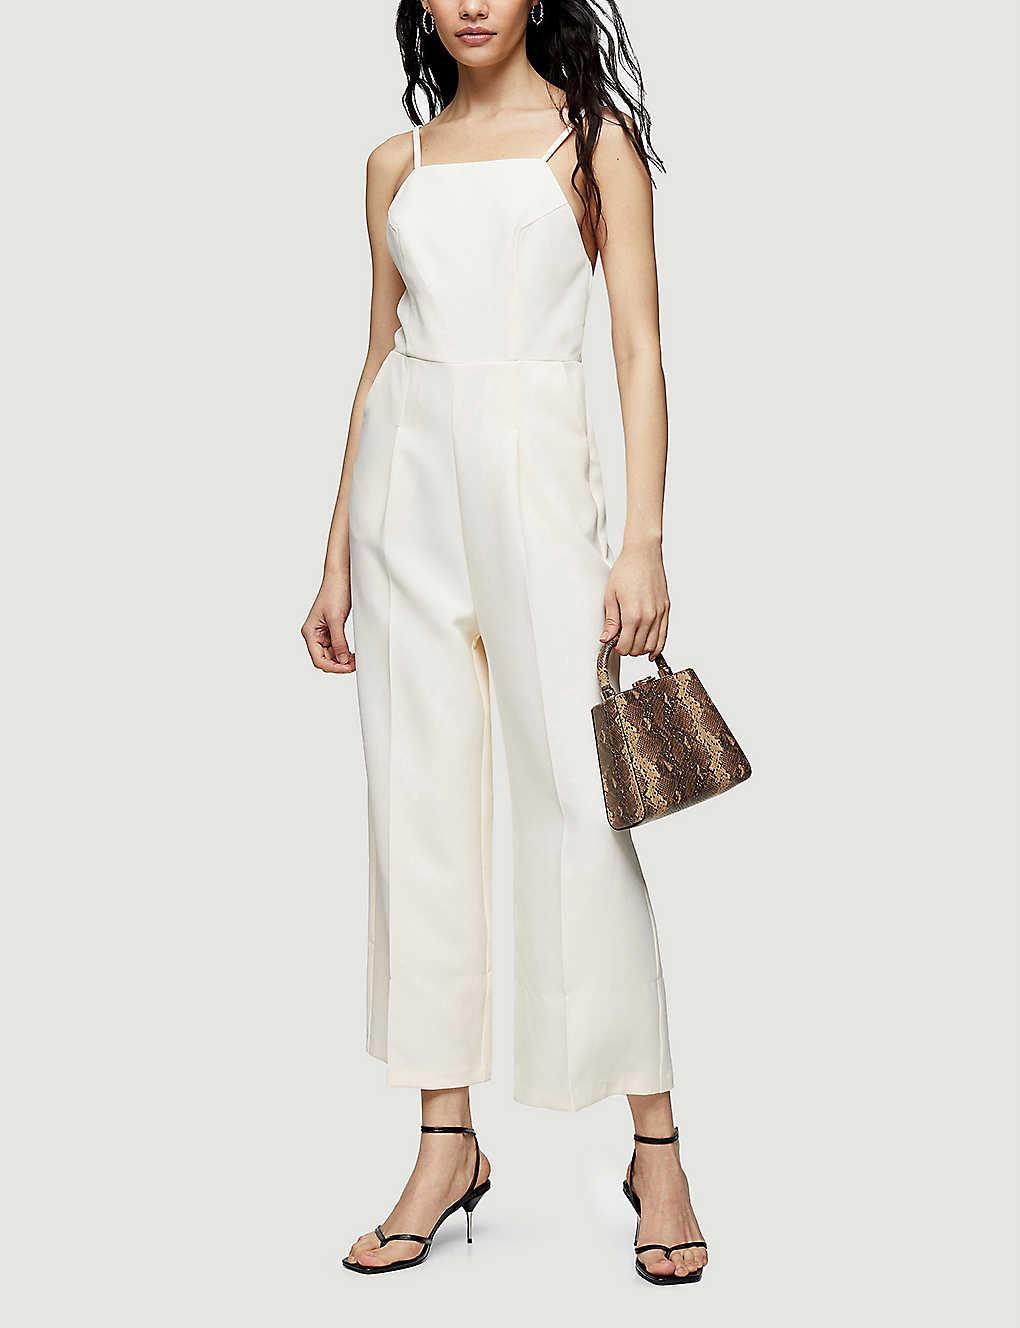 TOPSHOP Synthetic Ivory Cross Back Strappy Jumpsuit in White - Lyst